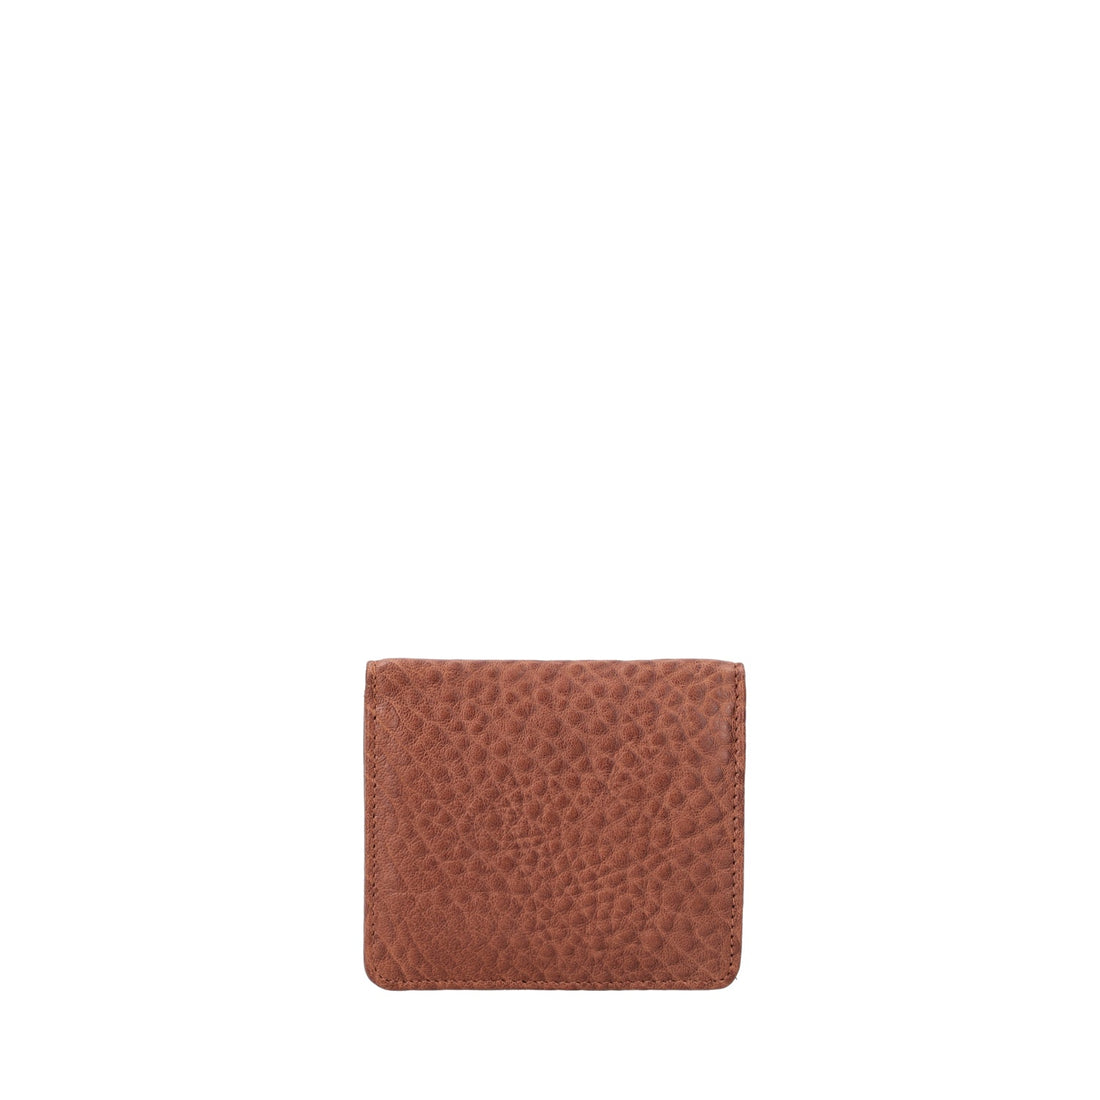 TAN SMALL GLADIOLO LEATHER WALLET